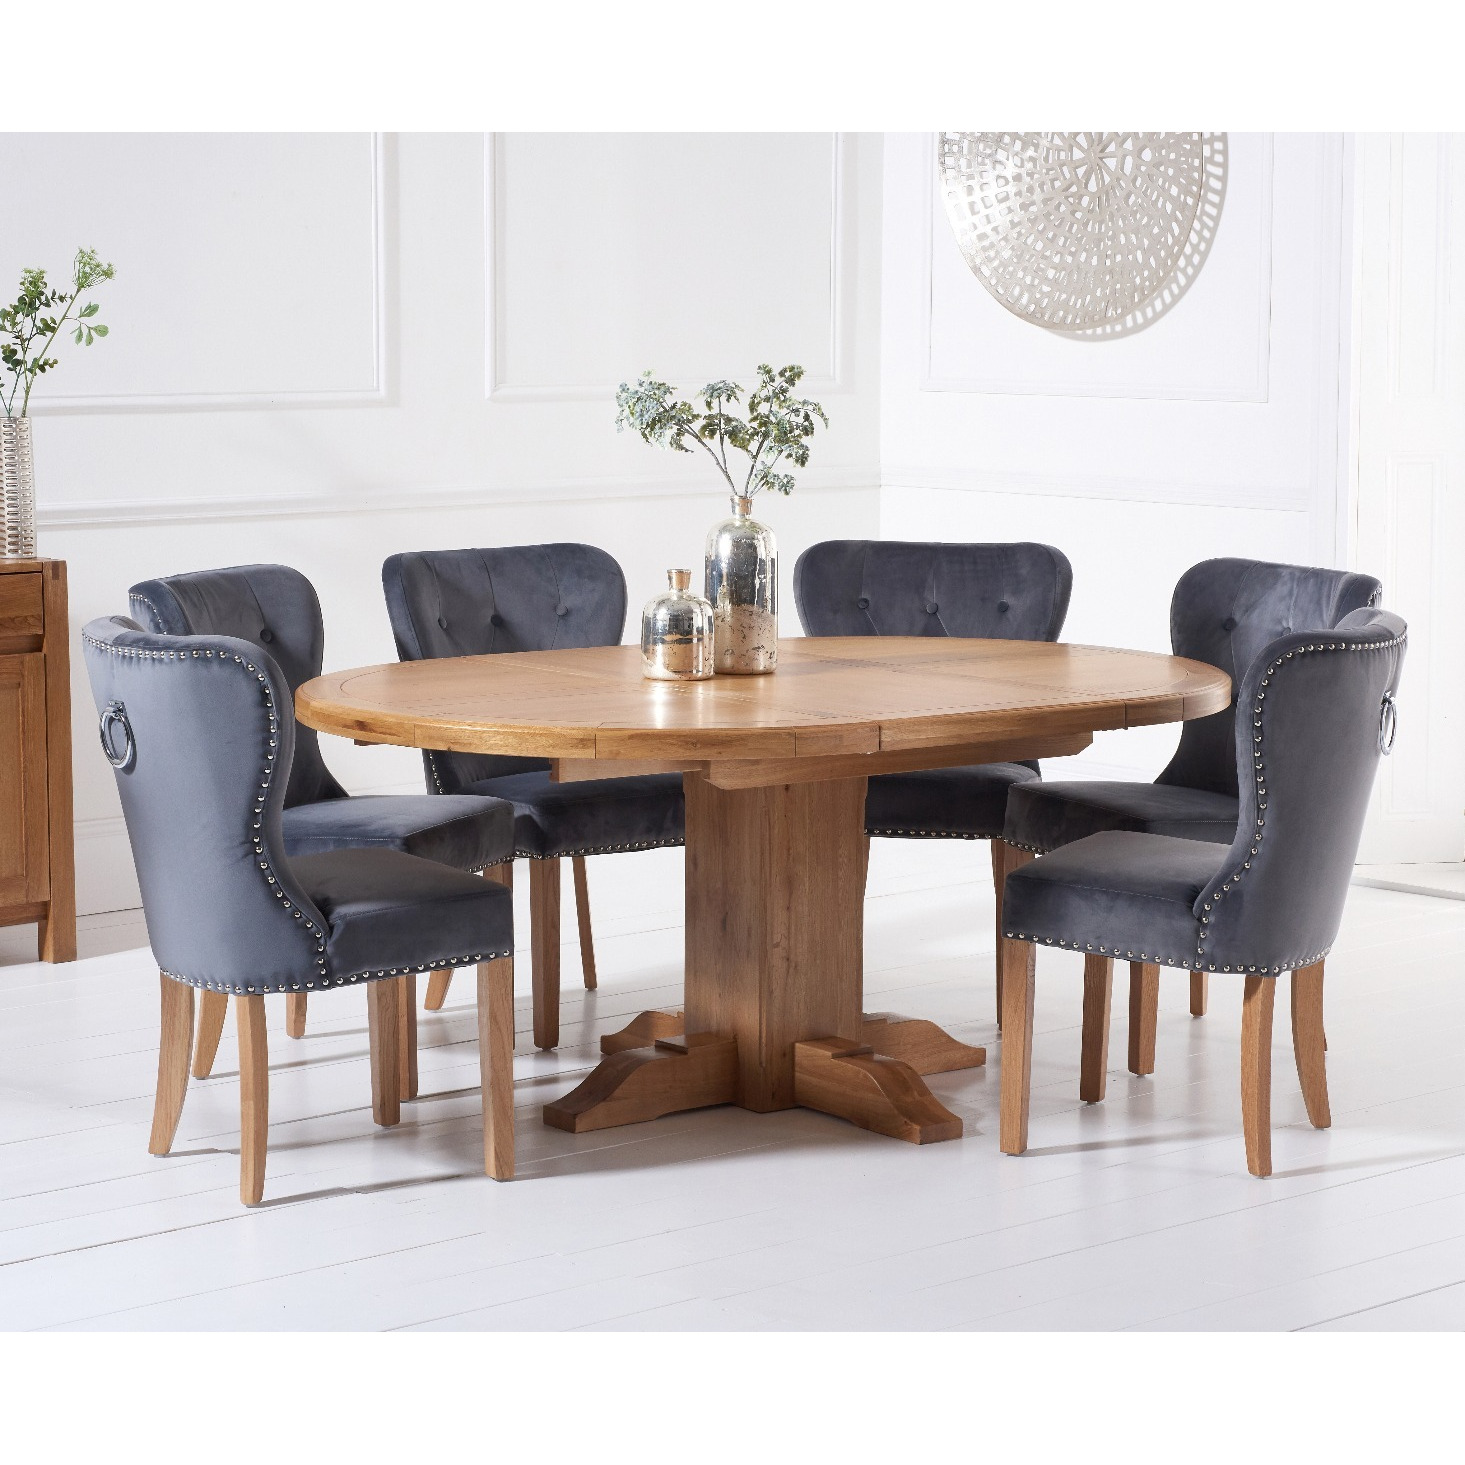 Hemsley Solid Oak Extending Pedestal Dining Table With 4 Grey Keswick Velvet Chairs